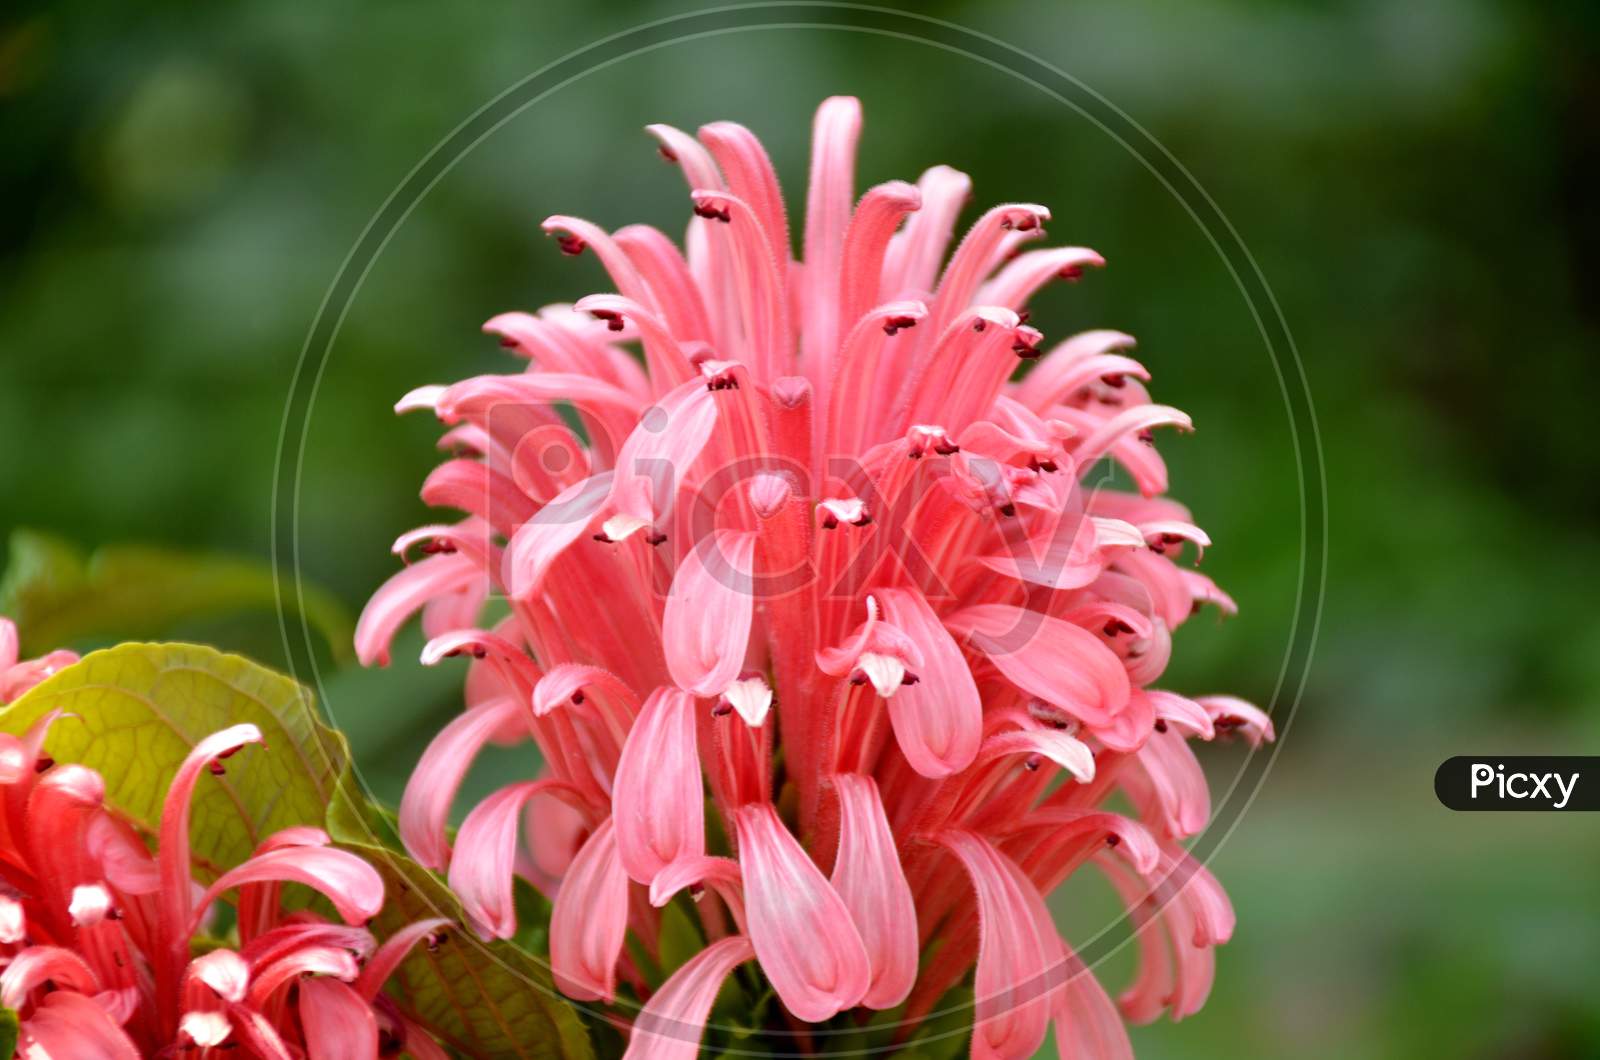 the beautifull pink colour flower in the guardan.